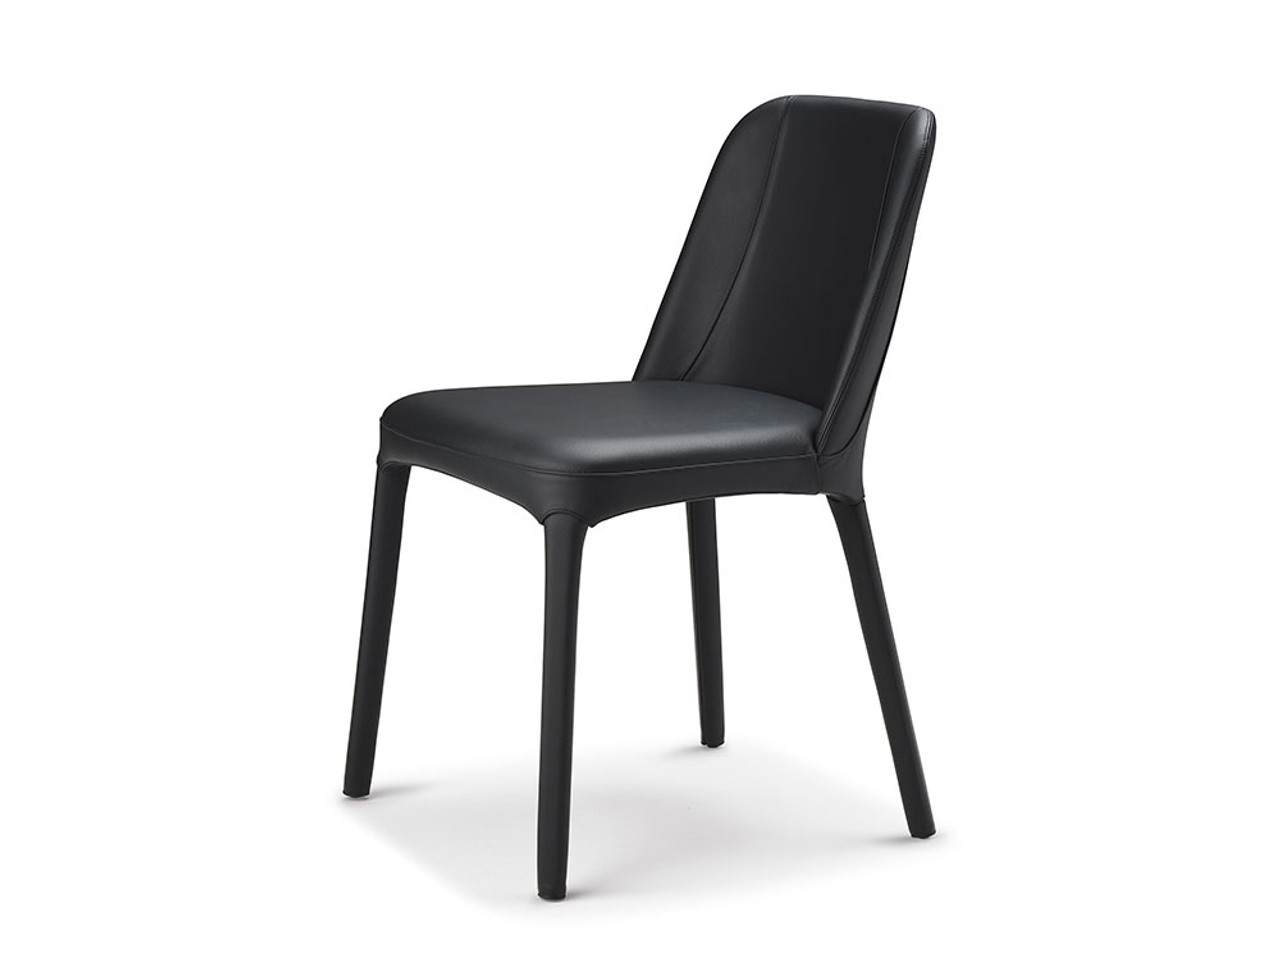 Cattelan Italia Wilma Dining Chair by Paolo Cattelan